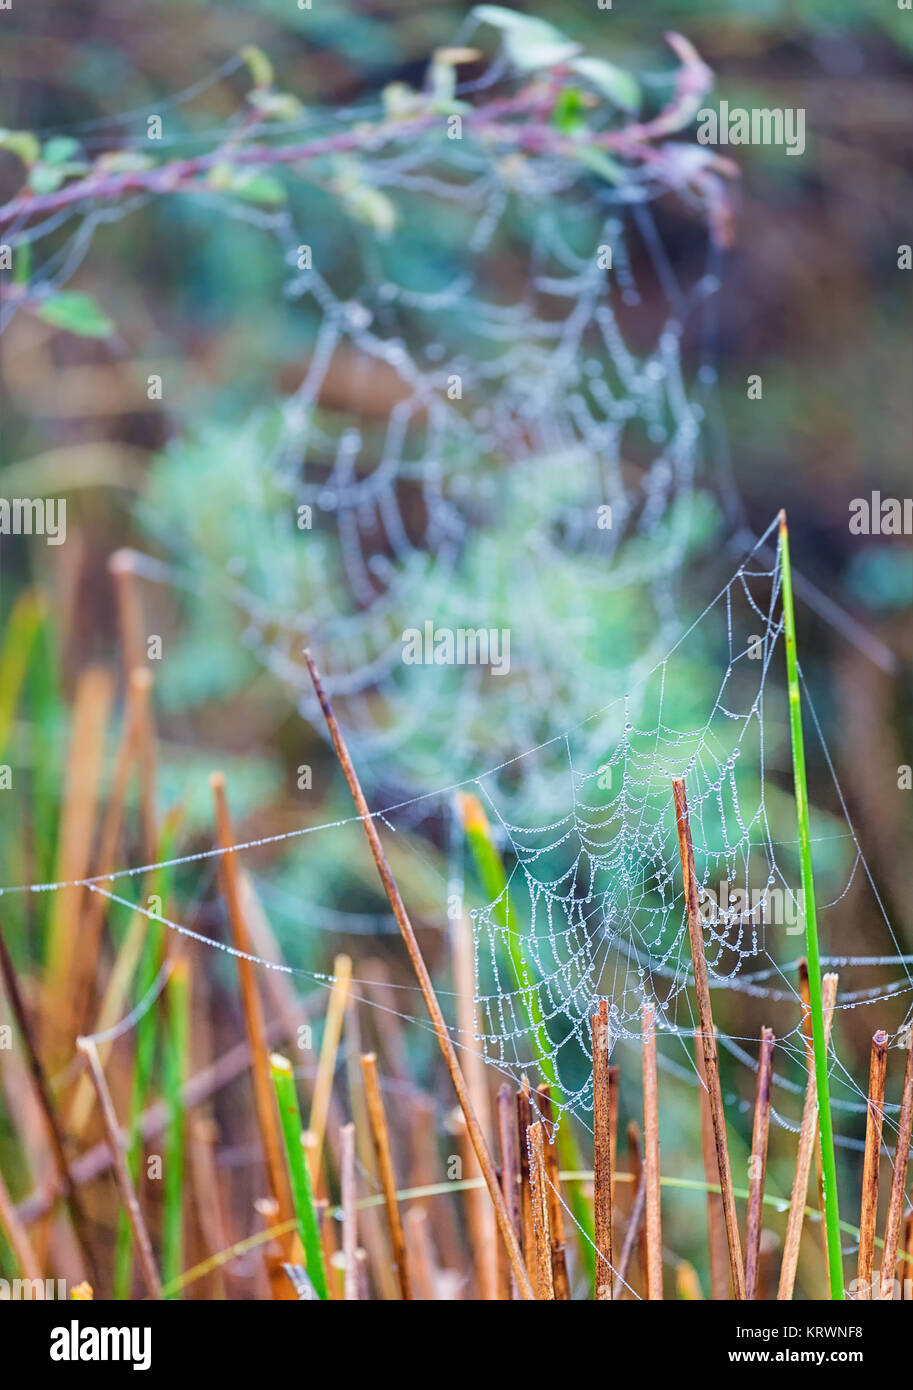 Natural scene with spider webs wet with rain. Stock Photo